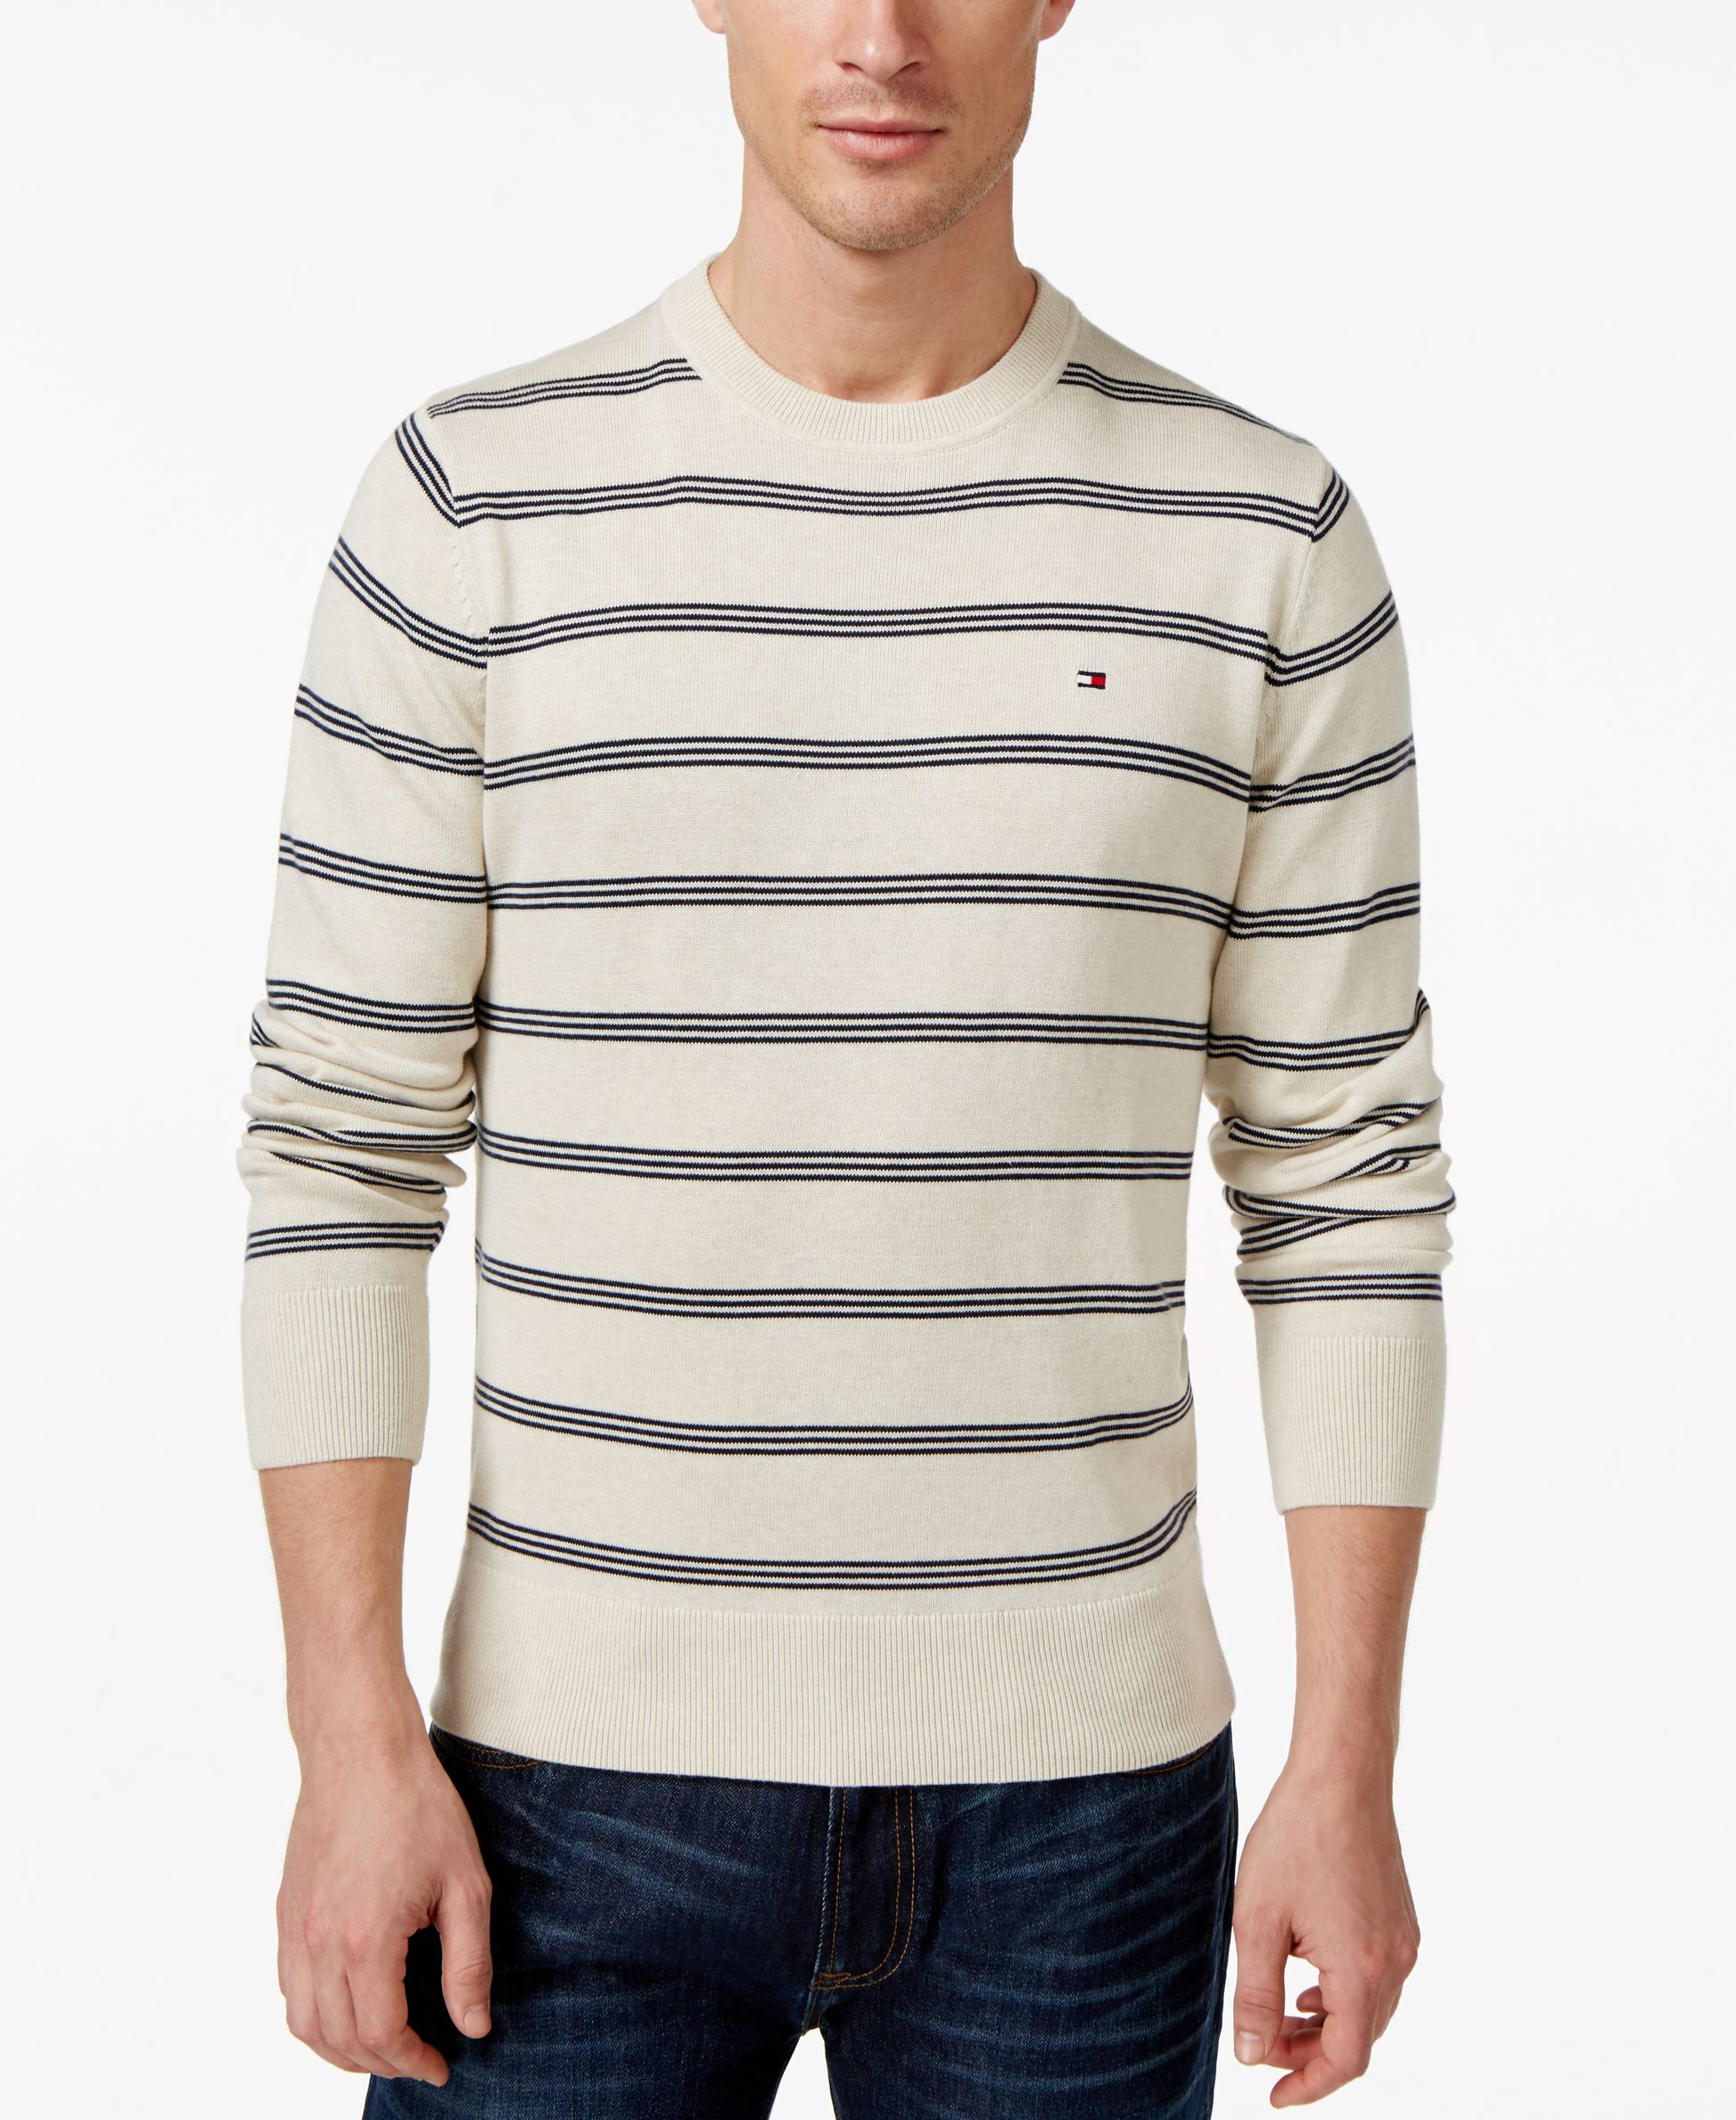 Lyst Tommy Hilfiger Mens Signature Crew Neck Striped Sweater In